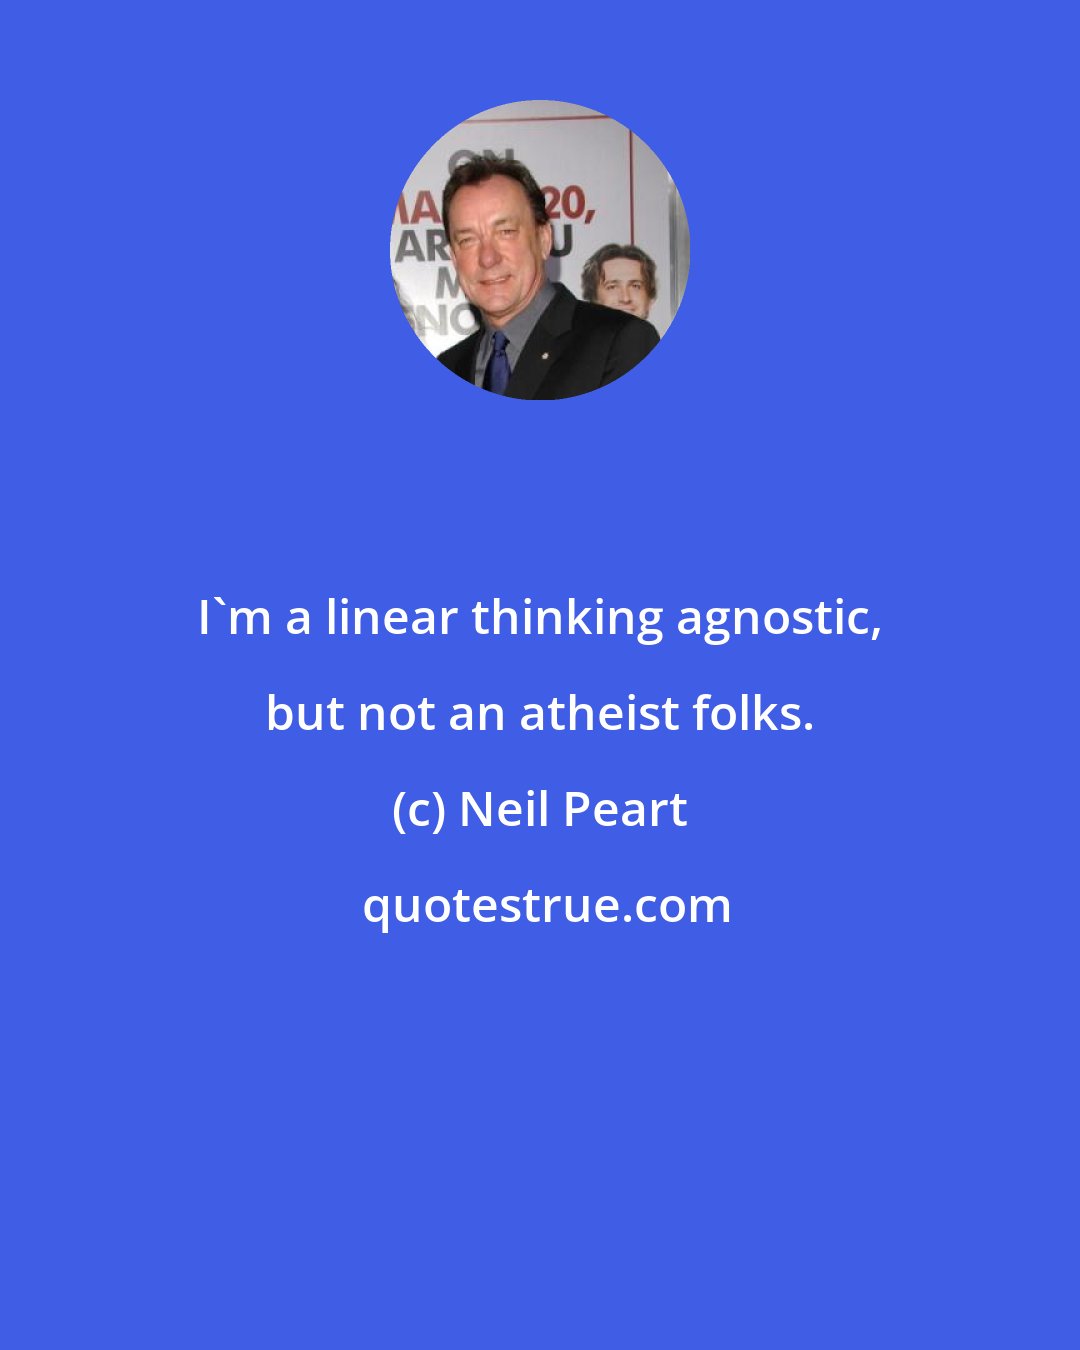 Neil Peart: I'm a linear thinking agnostic, but not an atheist folks.